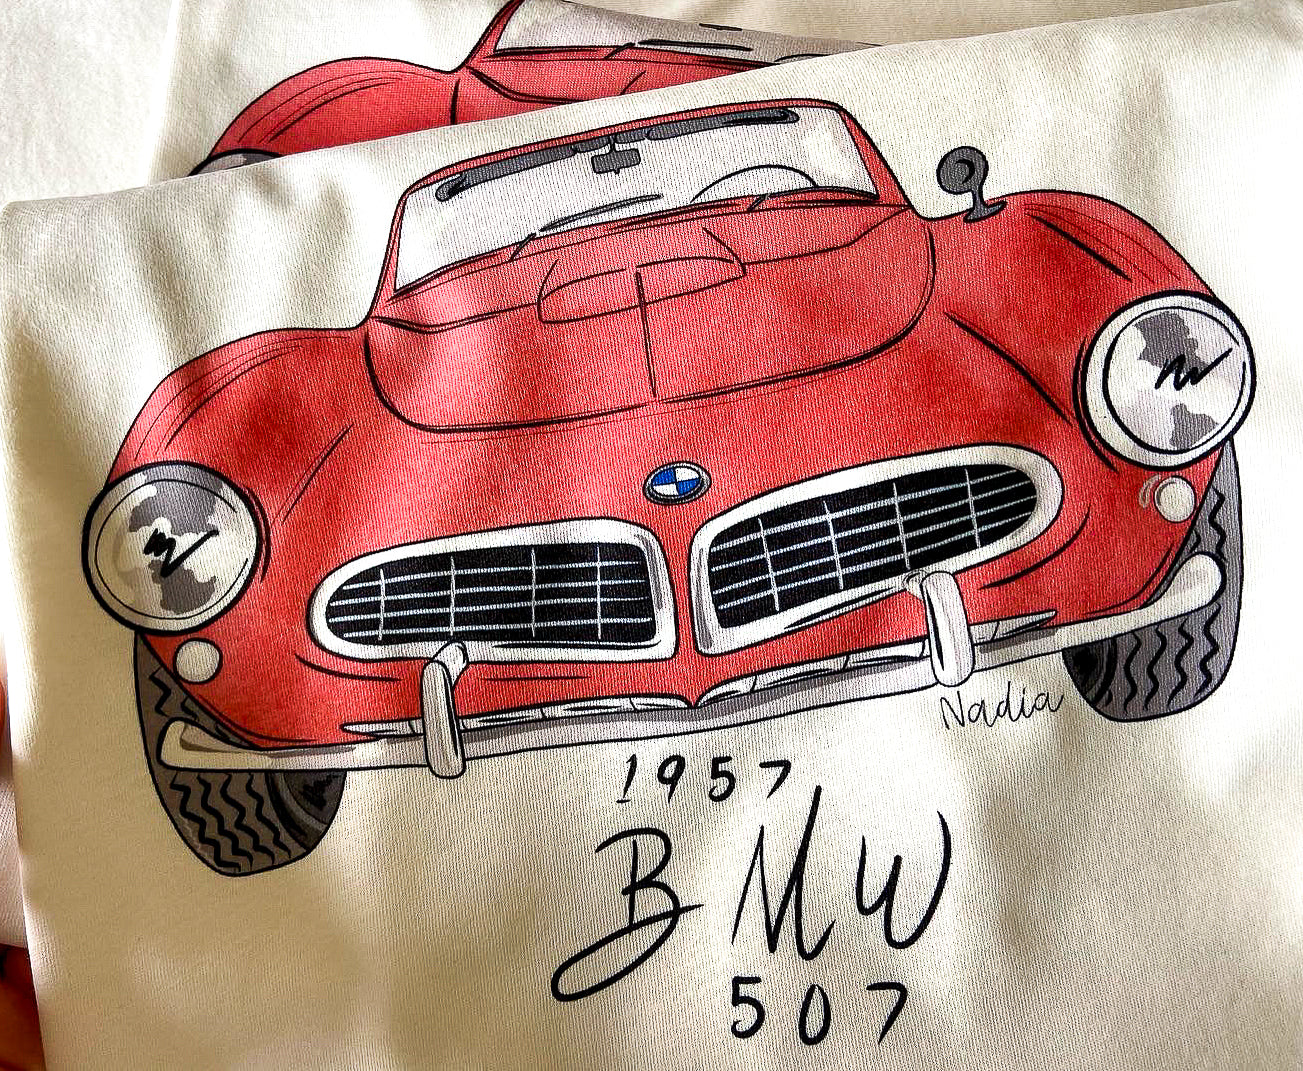 BMW 507 graphic tee illustrated by artist Nadia Watts